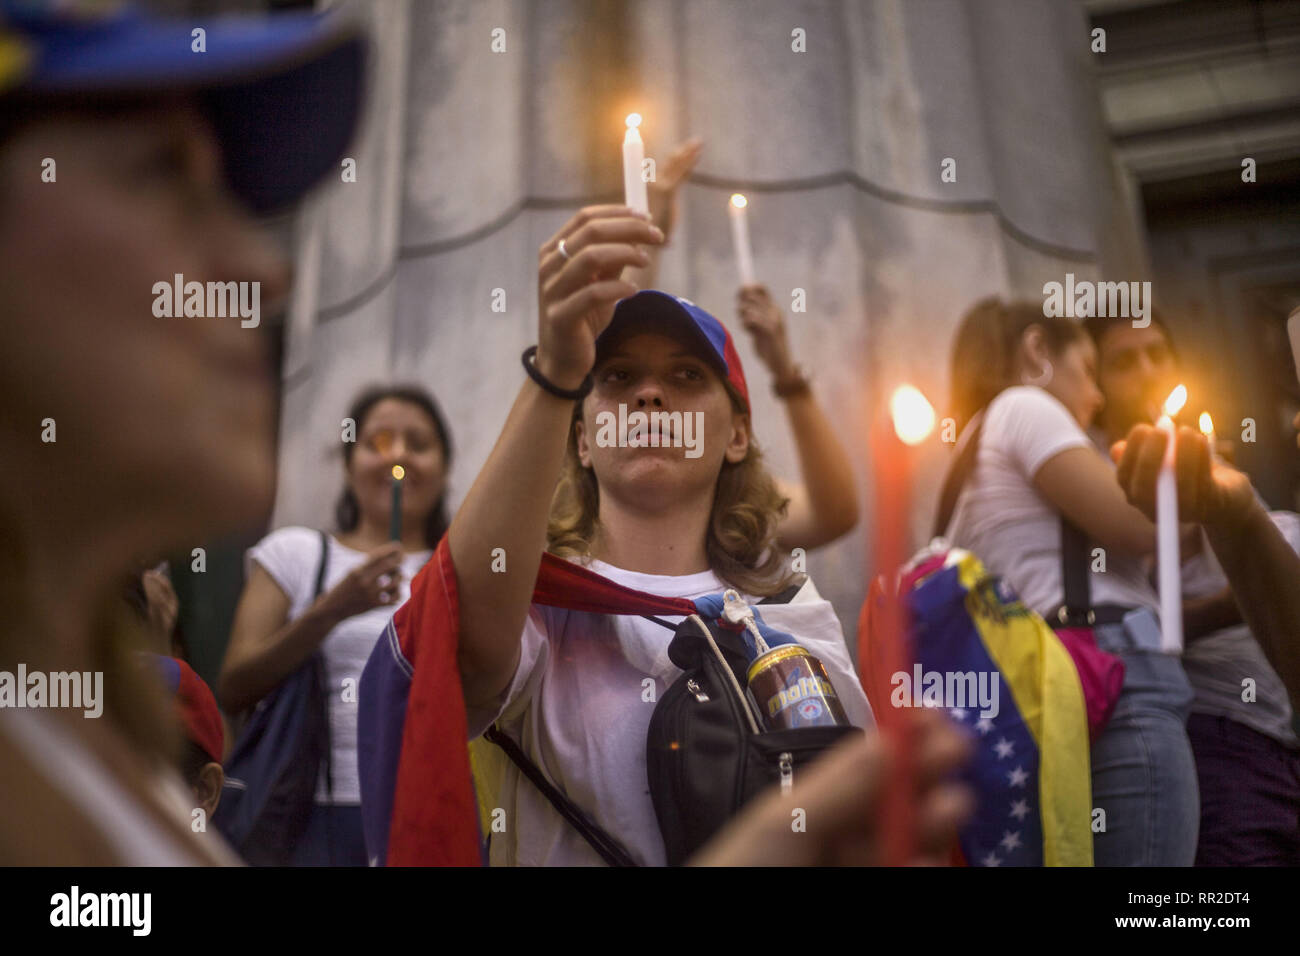 Buenos Aires, Federal Capital, Argentina. 23rd Feb, 2019. Venezuelan migrants residing in the City of Buenos Aires, Argentina, are concentrated in the Faculty of Law of the University of Buenos Aires to hold a vigil in support of Juan GuaidÃ³ and the humanitarian aid that he expects in the Venezuelan borders with Brazil and Colombia to enter to Venezuela amid heavy clashes between Venezuelan security forces and demonstrators. Credit: Roberto Almeida Aveledo/ZUMA Wire/Alamy Live News Stock Photo